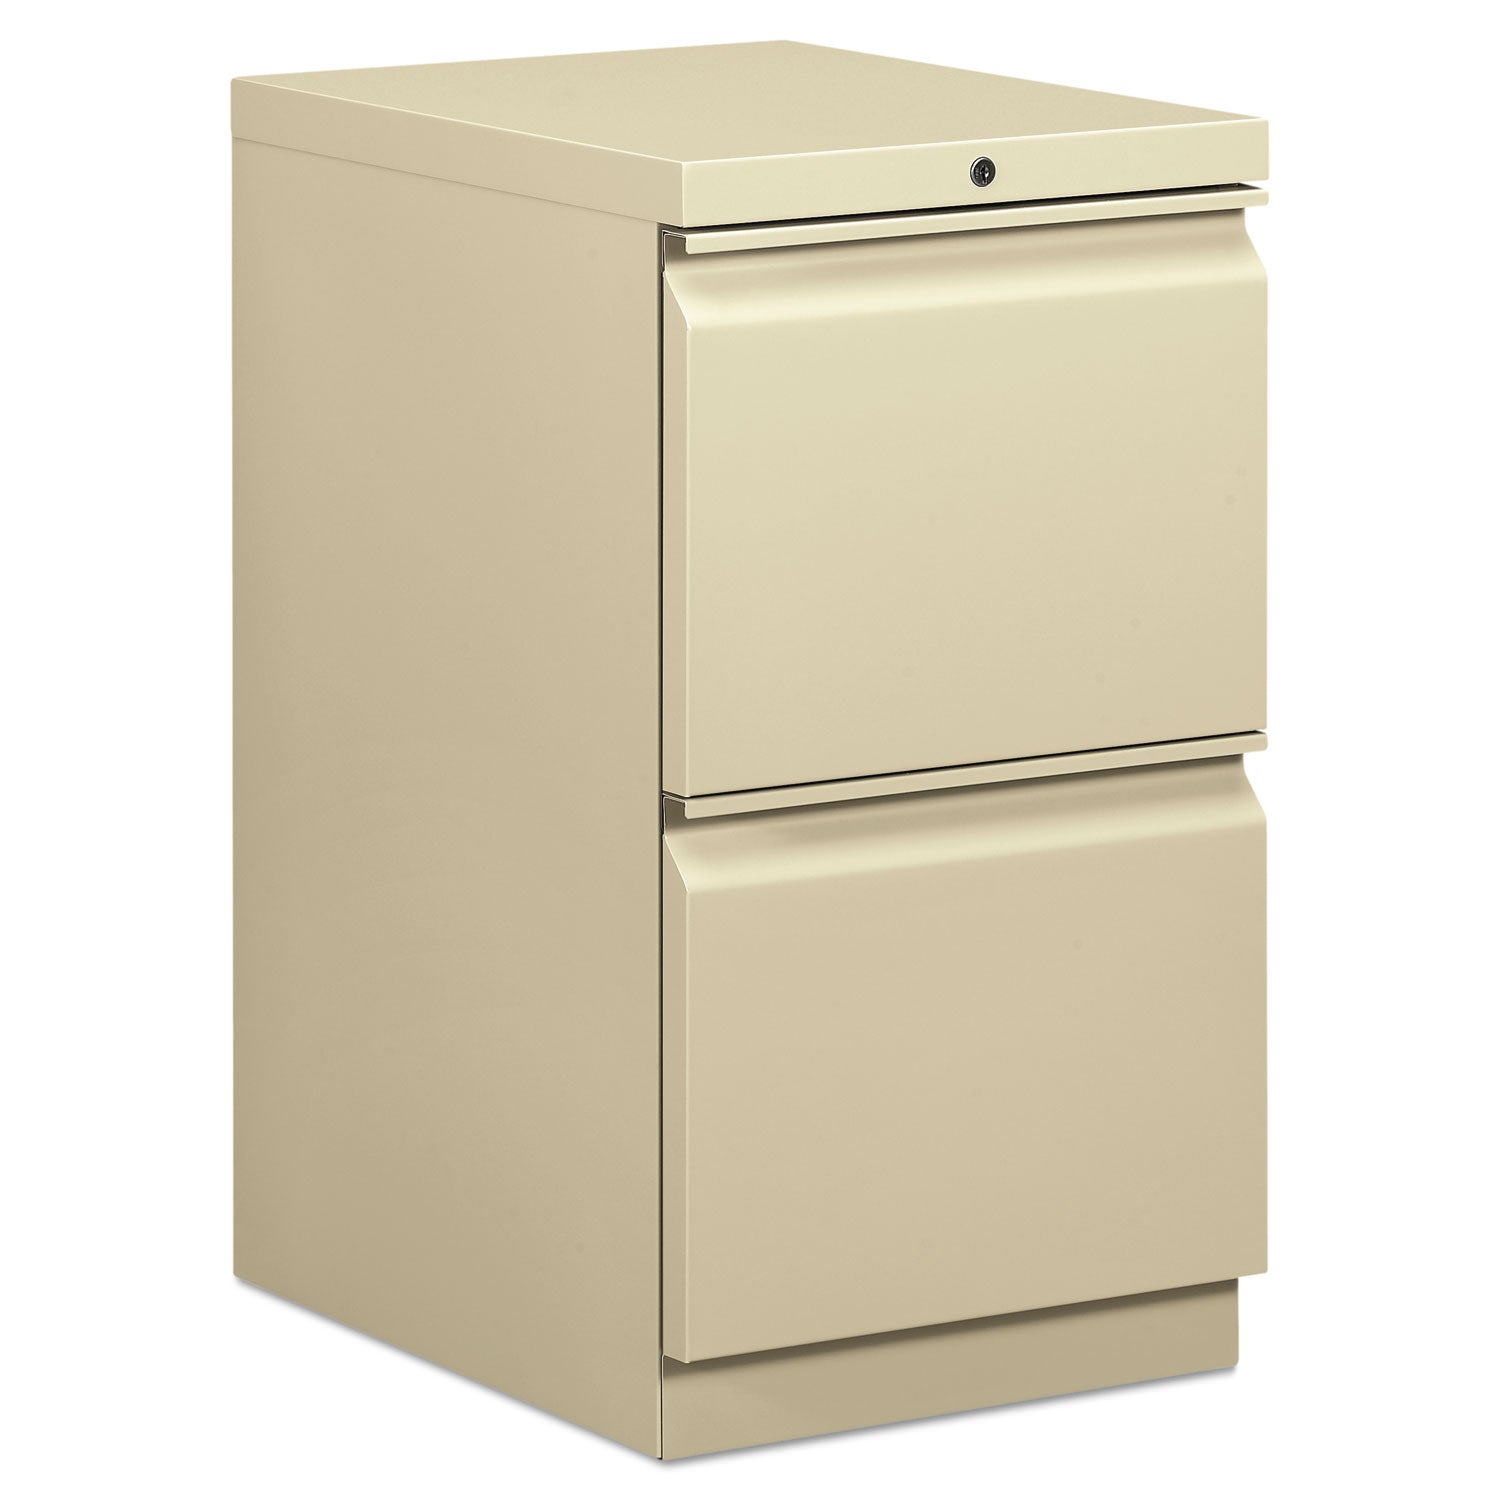 Brigade Mobile Pedestal, Left or Right, 2 Letter-Size File Drawers, Putty, 15" x 19.88" x 28 - 